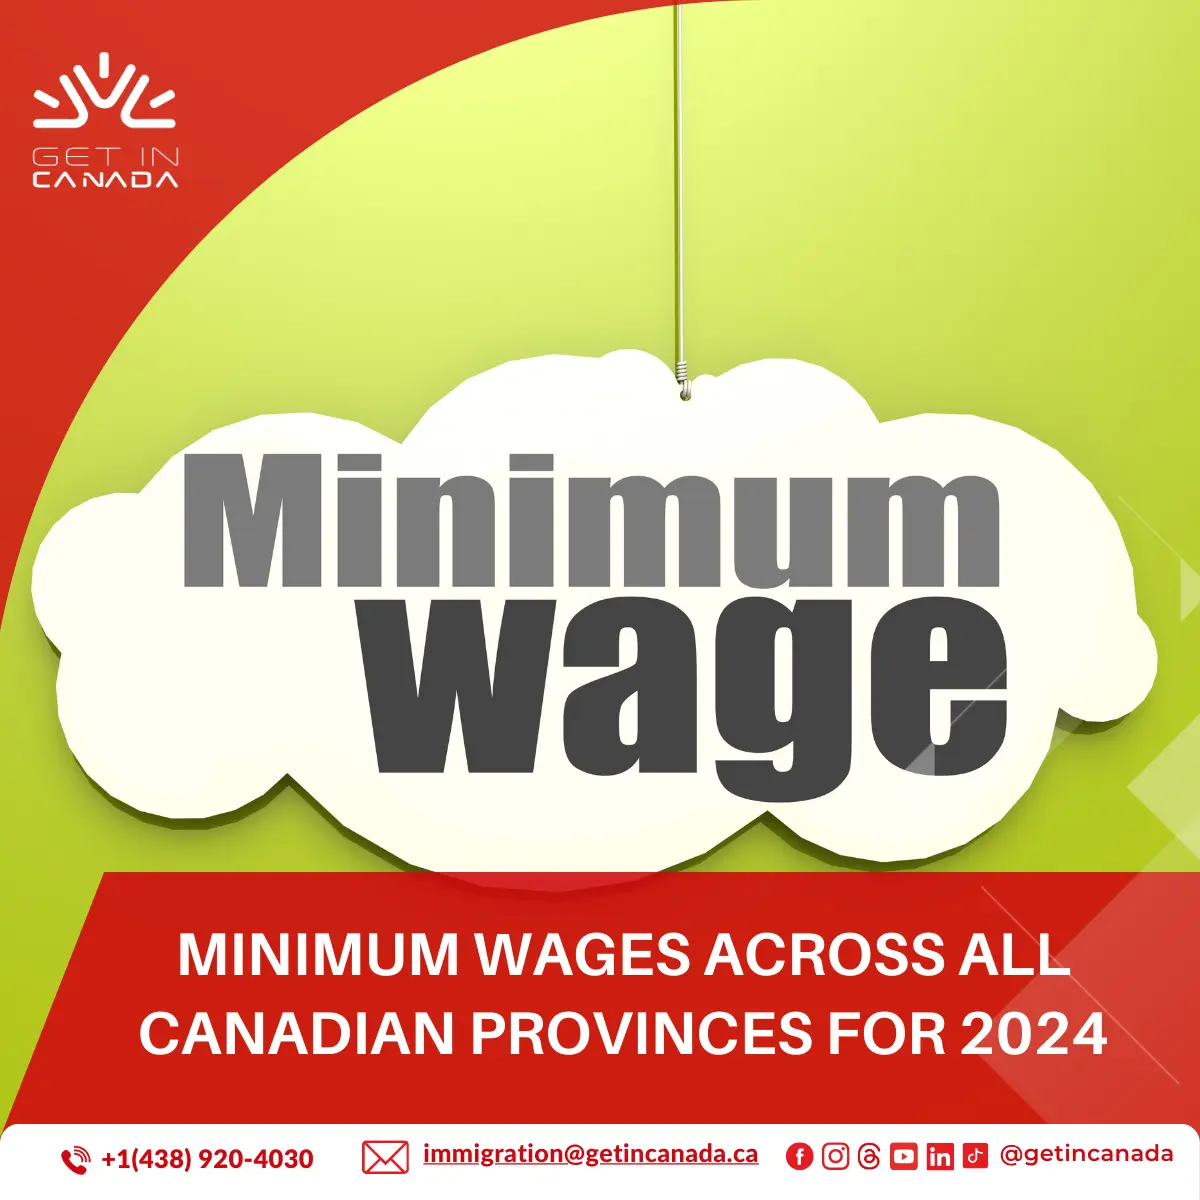 What Are the Minimum Wages in Every Canadian Province for 2024?